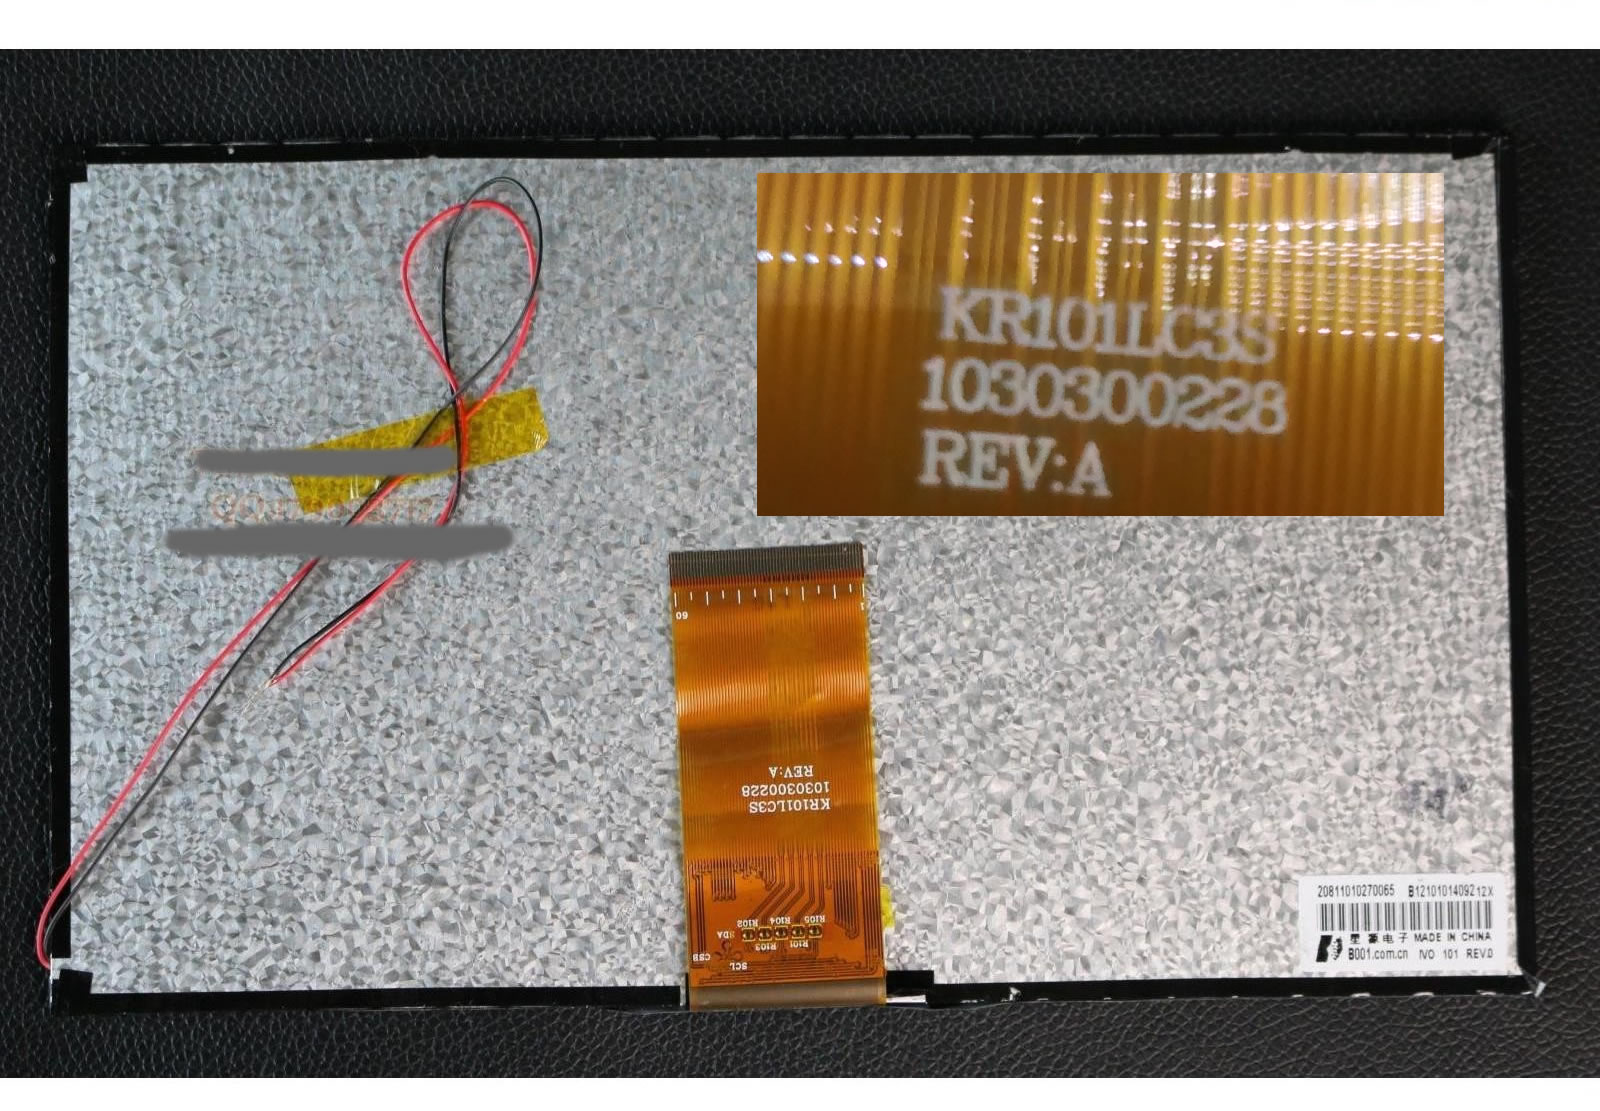 KR101LC3S  LCD display